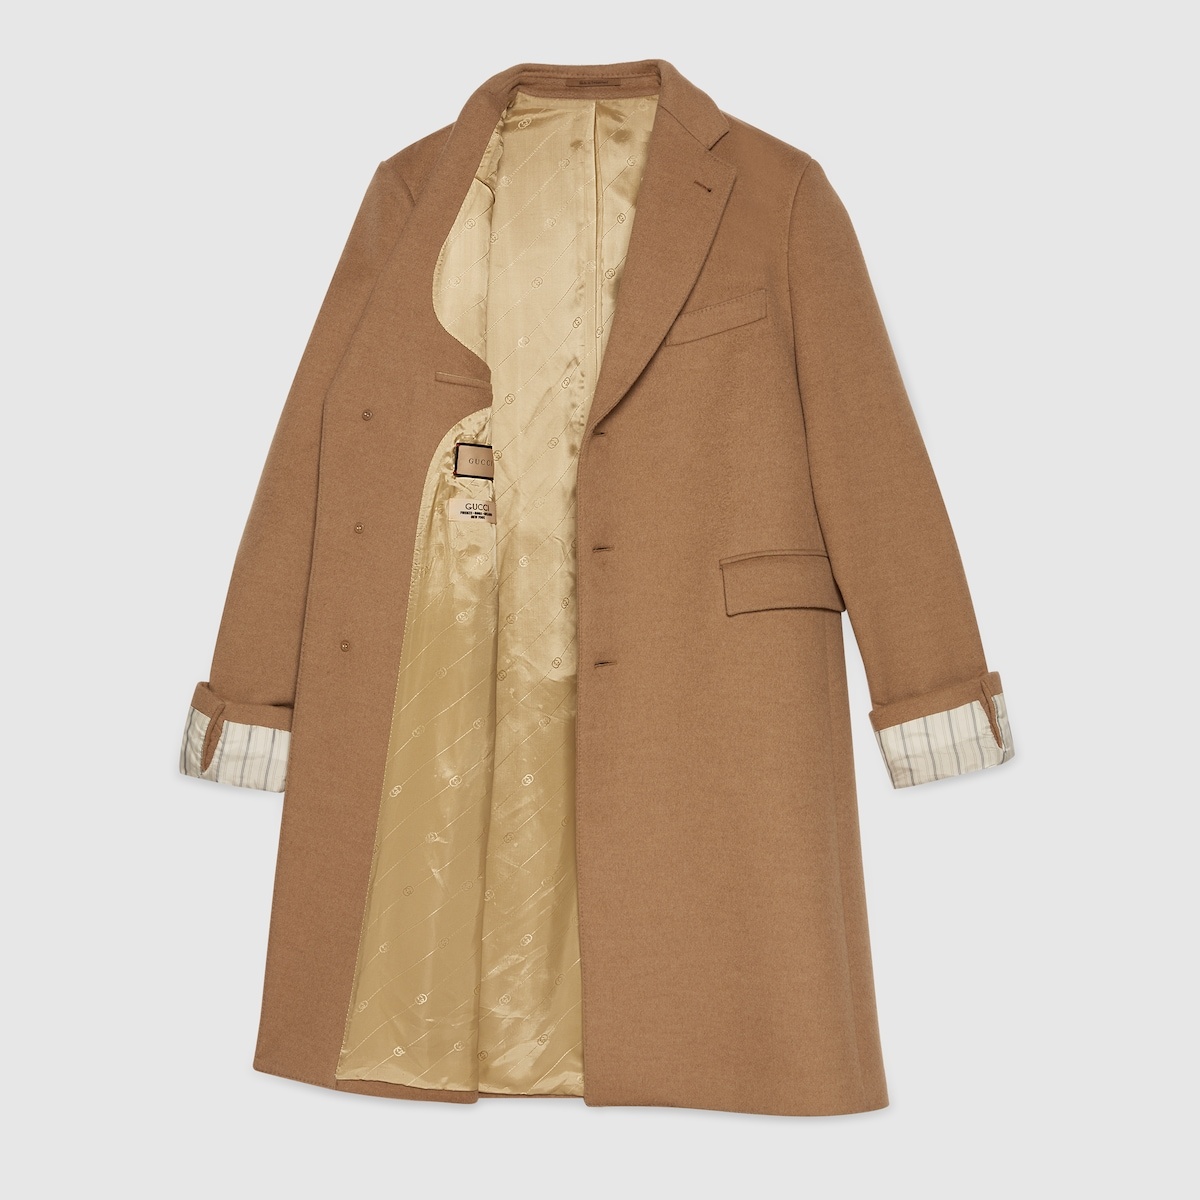 Camelhair coat with Gucci cities label - 8